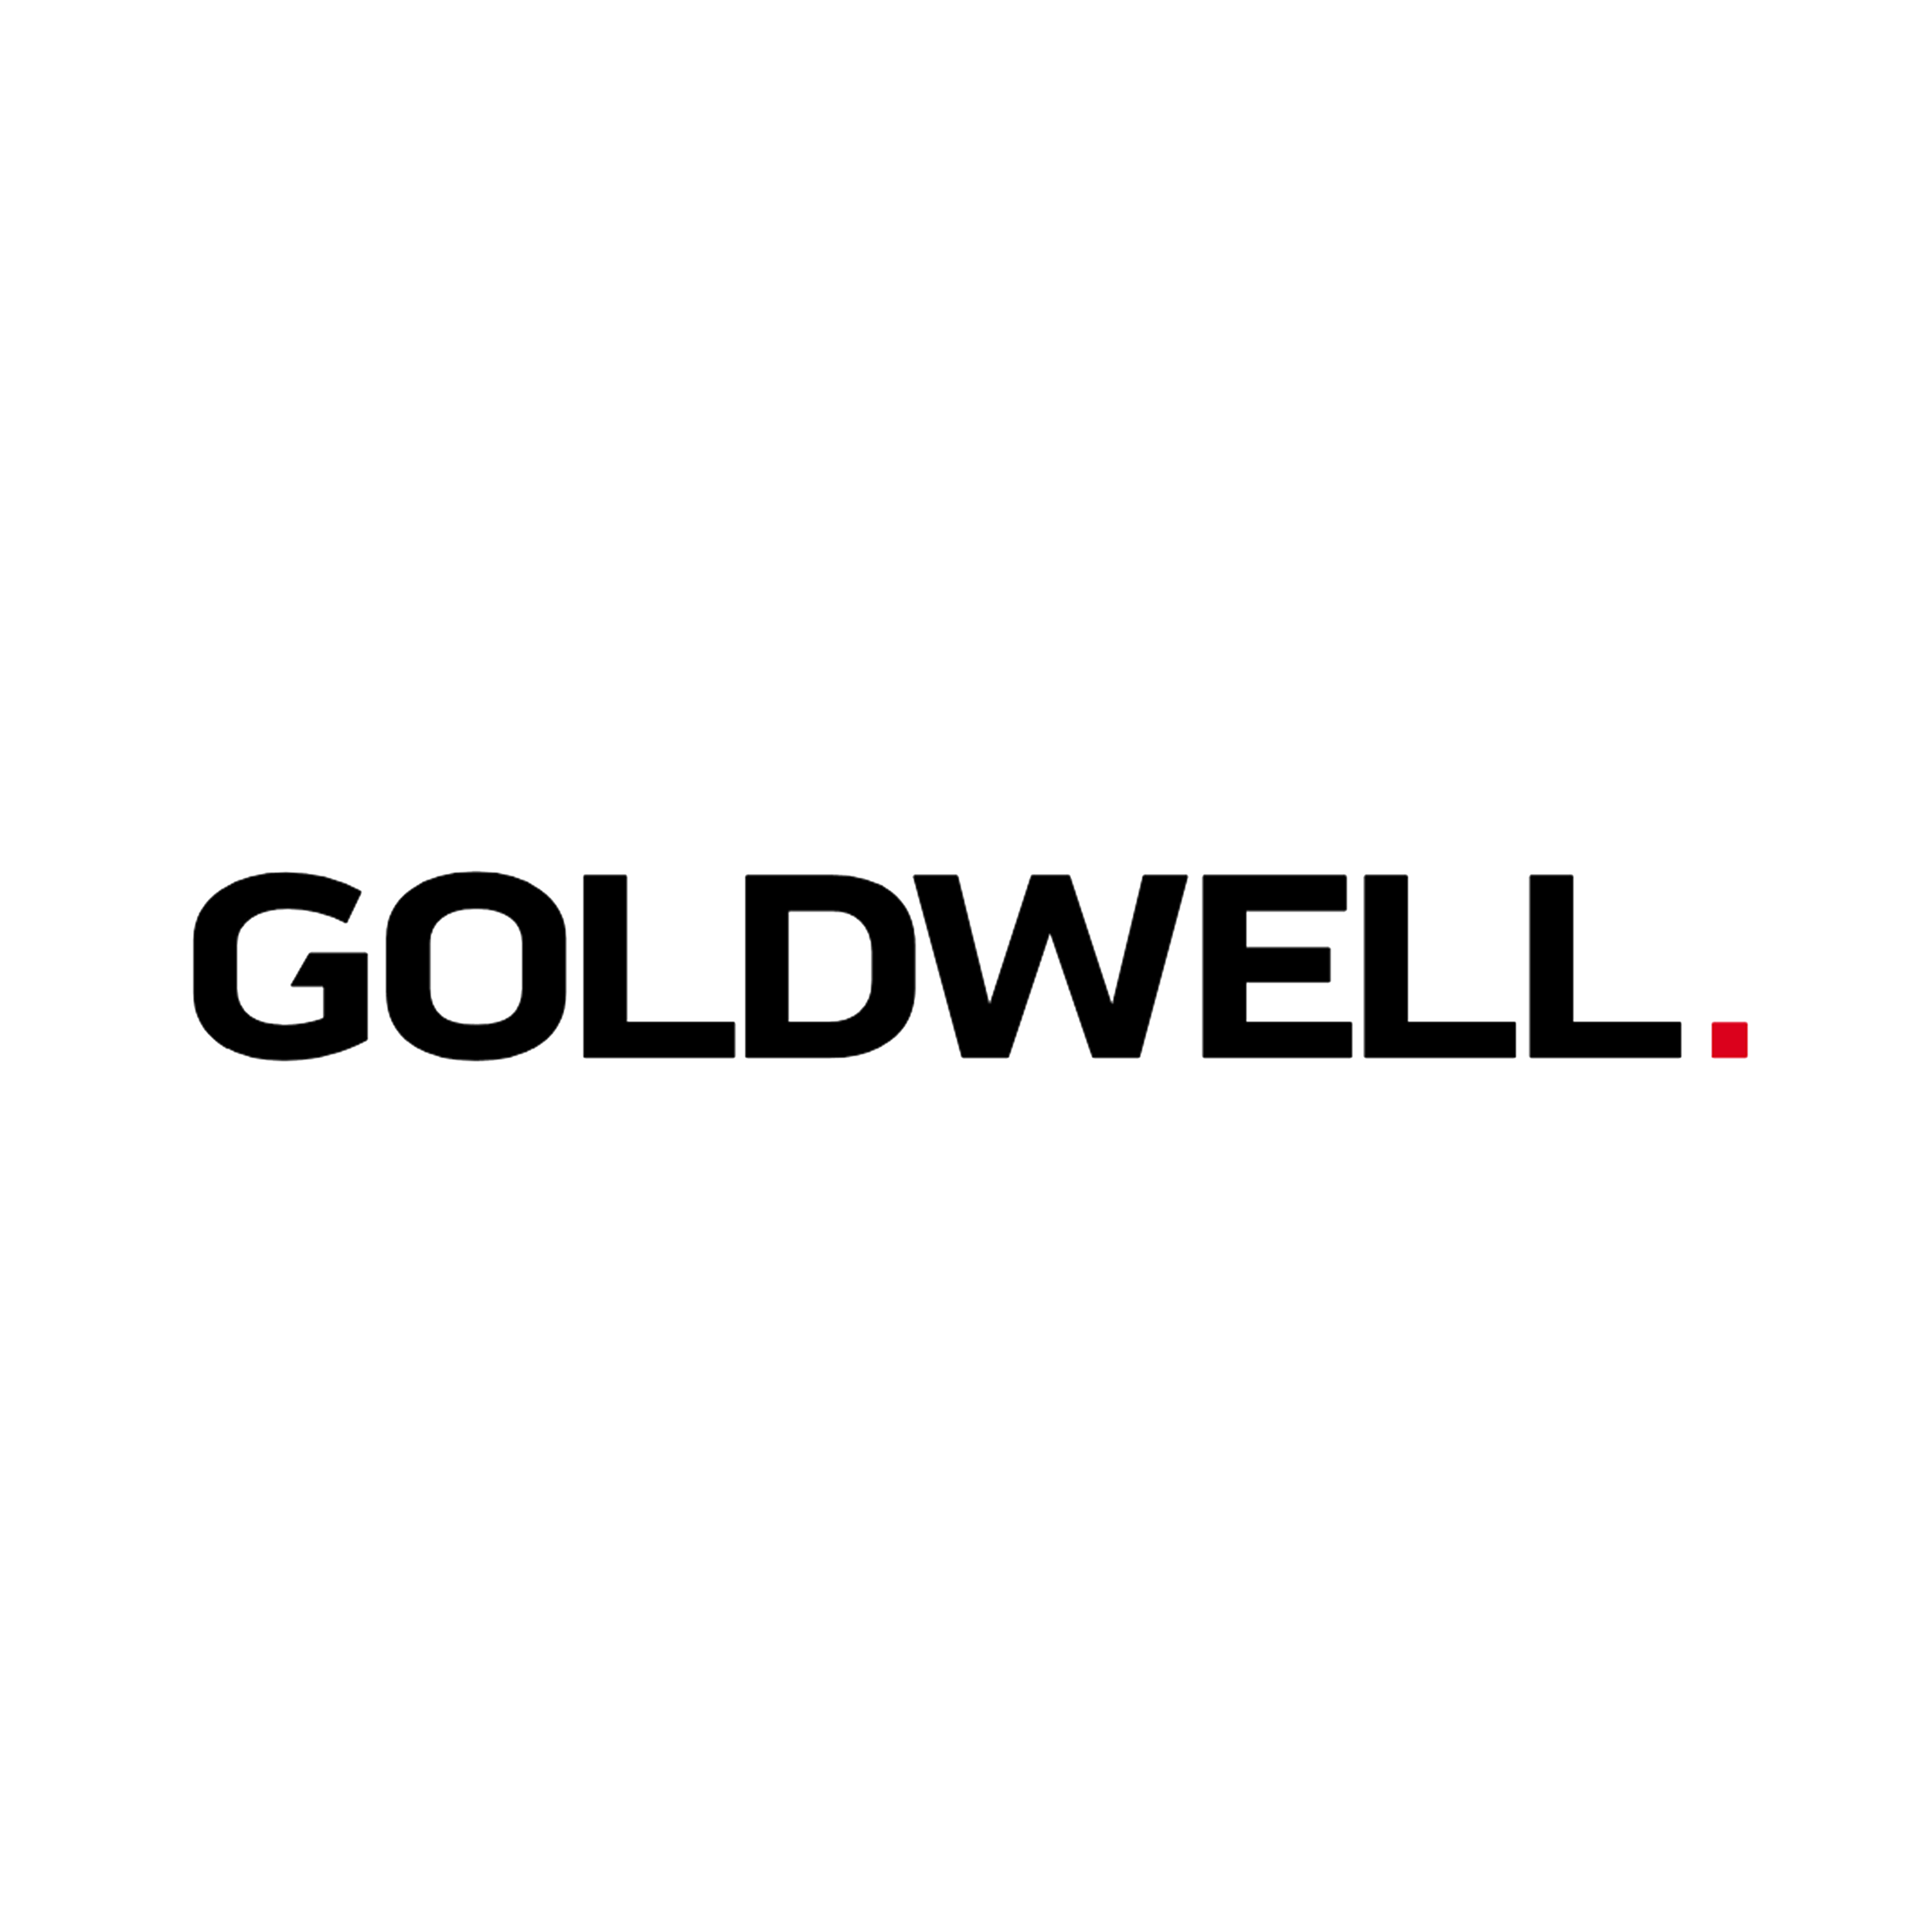 goldwell.png